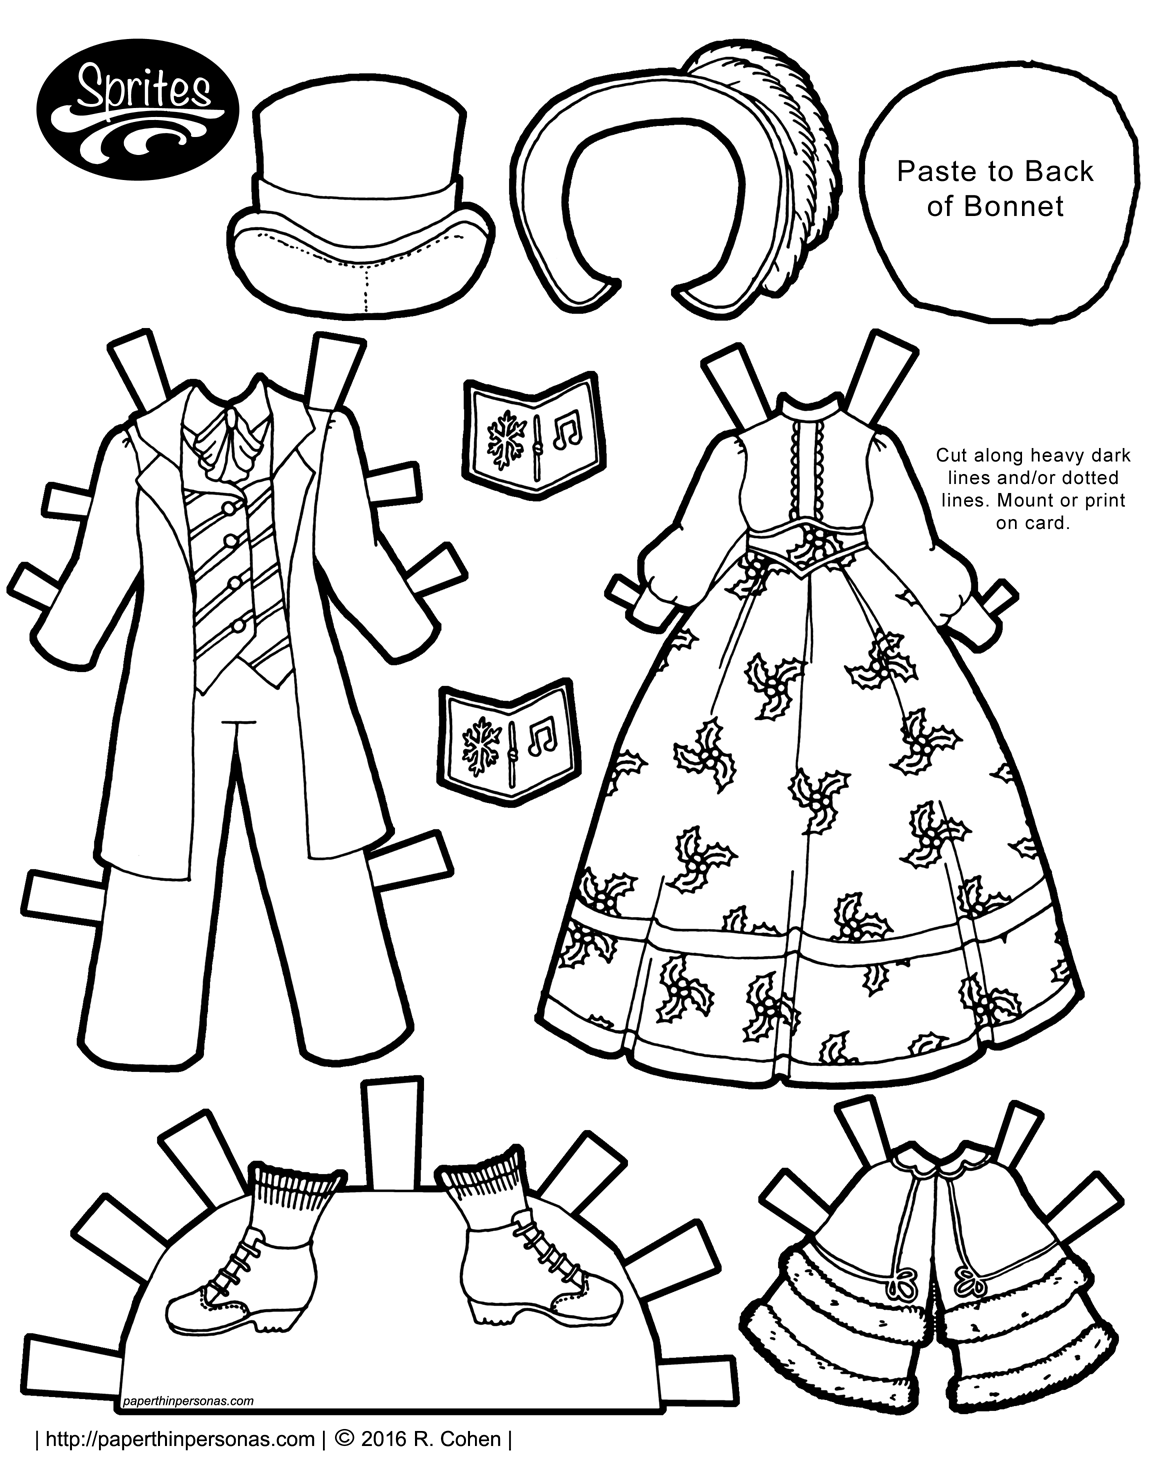 Sprites paper dolls get dickens caroling costumes for the holidays